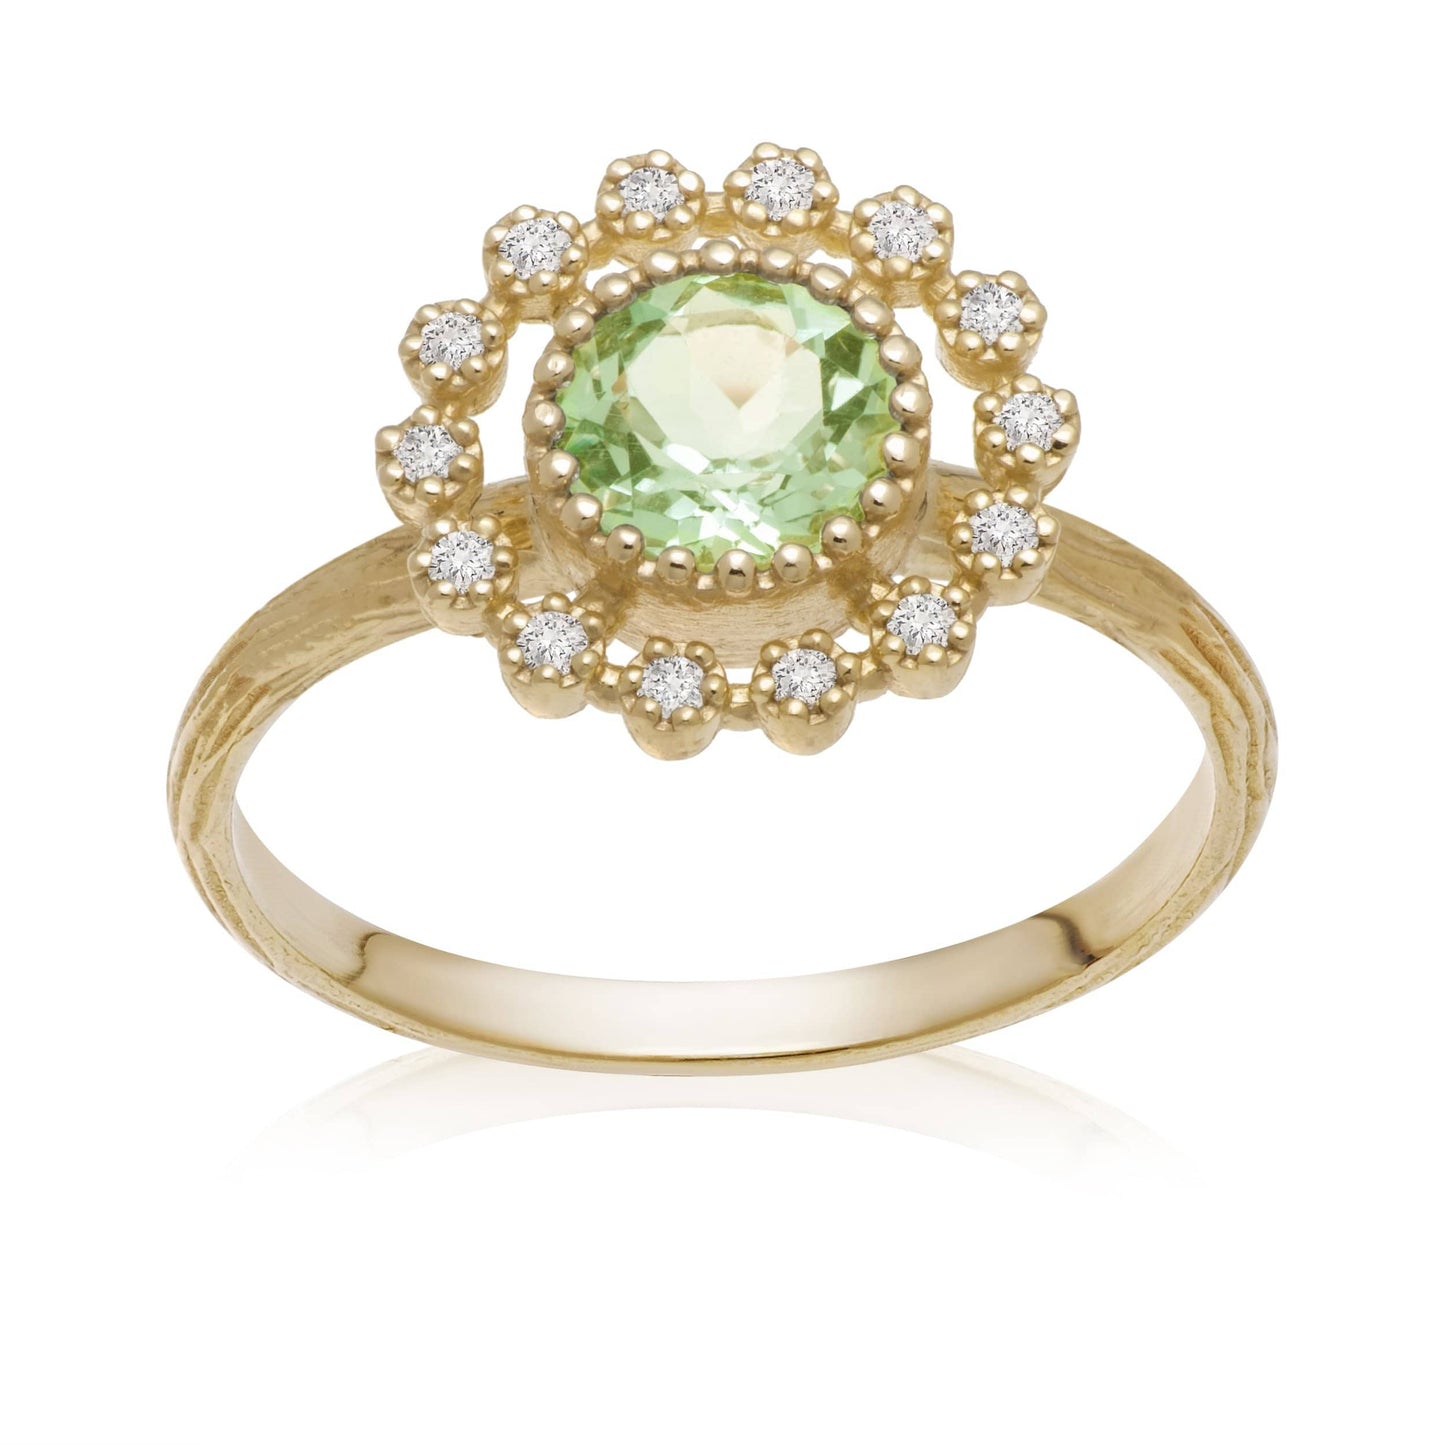 Dalia T Online Ring Lace Collection 14KT Yellow Gold Round Peridot & Diamond Ring